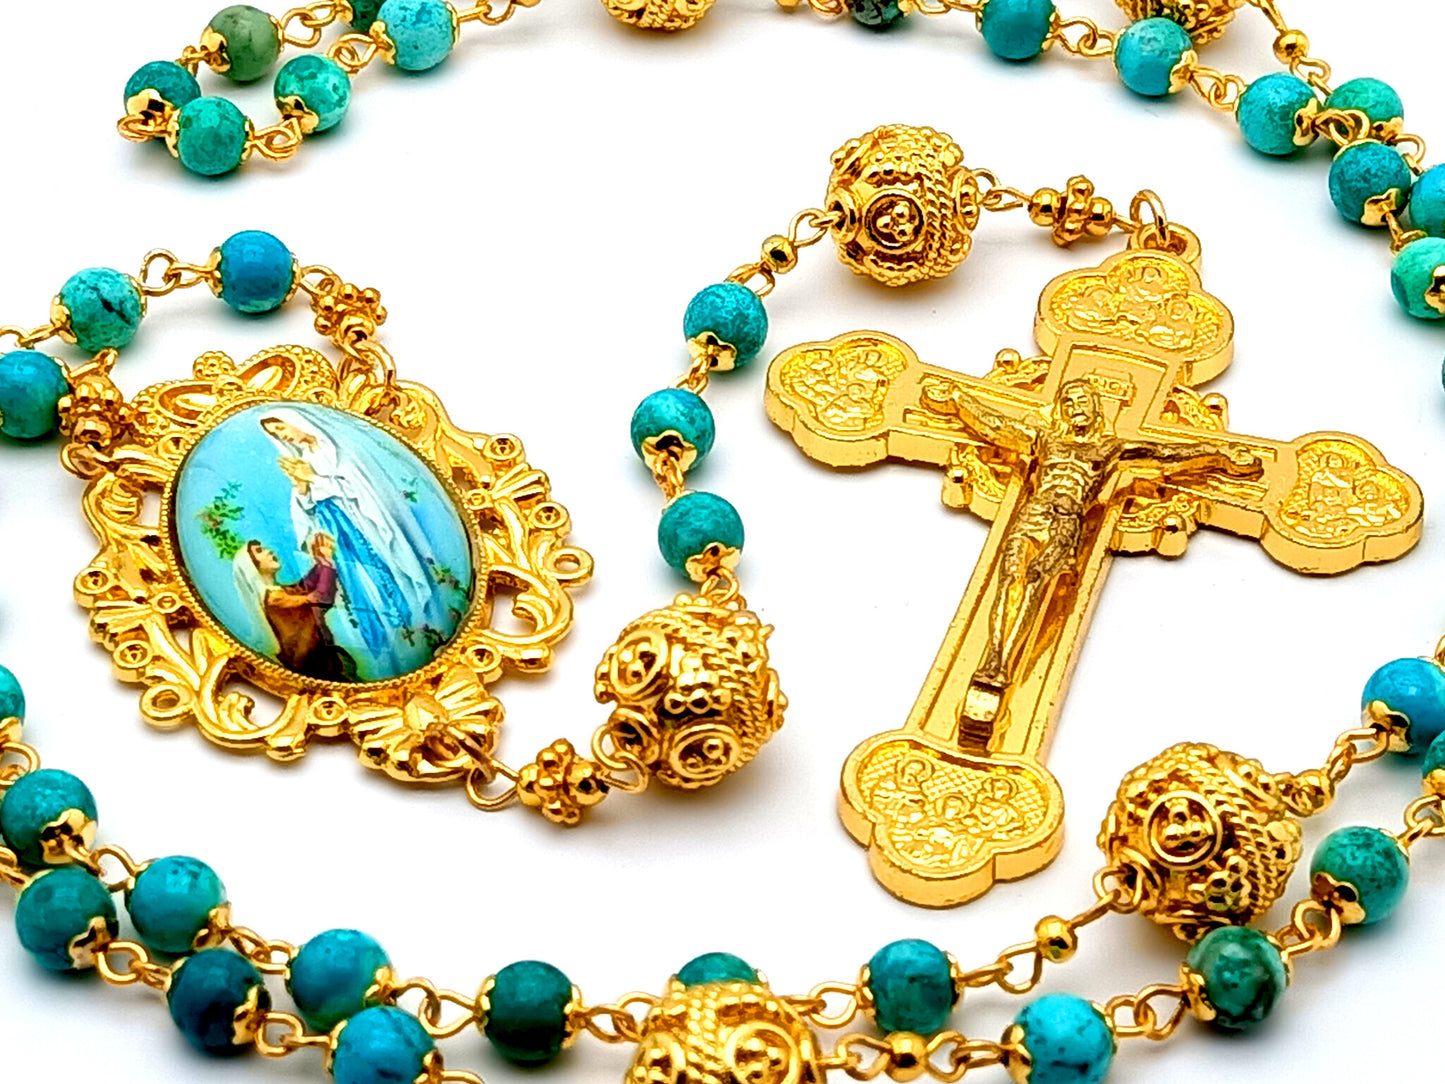 Our Lady of Lourdes and Saint Bernadette unique rosary beads with gold and turquoise gemstone beads and gold plated Twelve Apostles crucifix.